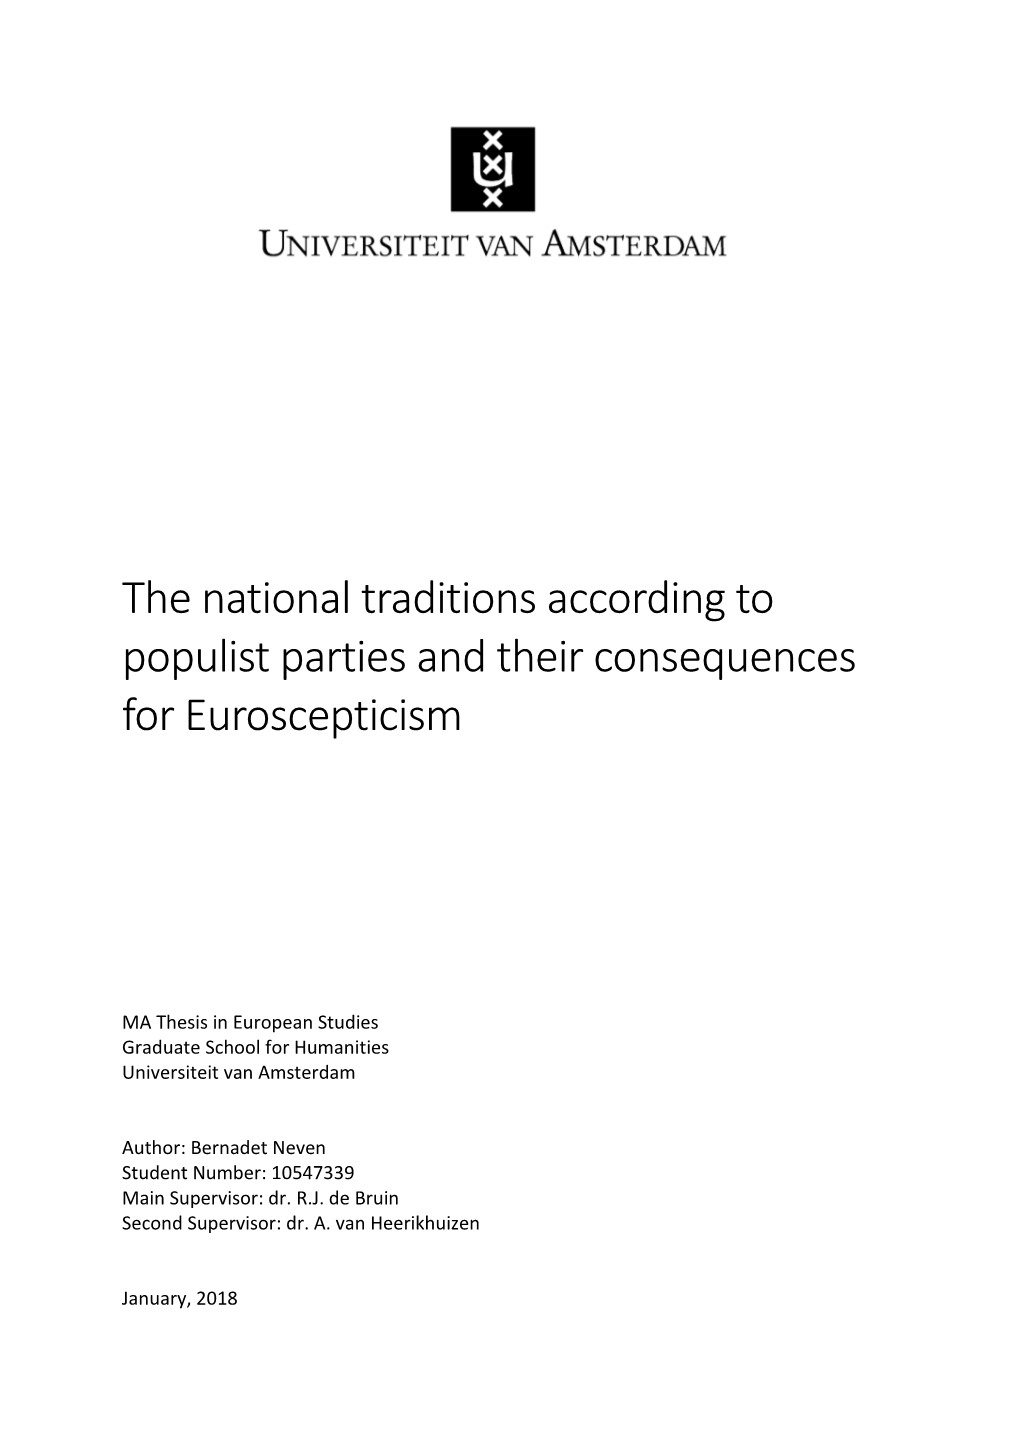 The National Traditions According to Populist Parties and Their Consequences for Euroscepticism